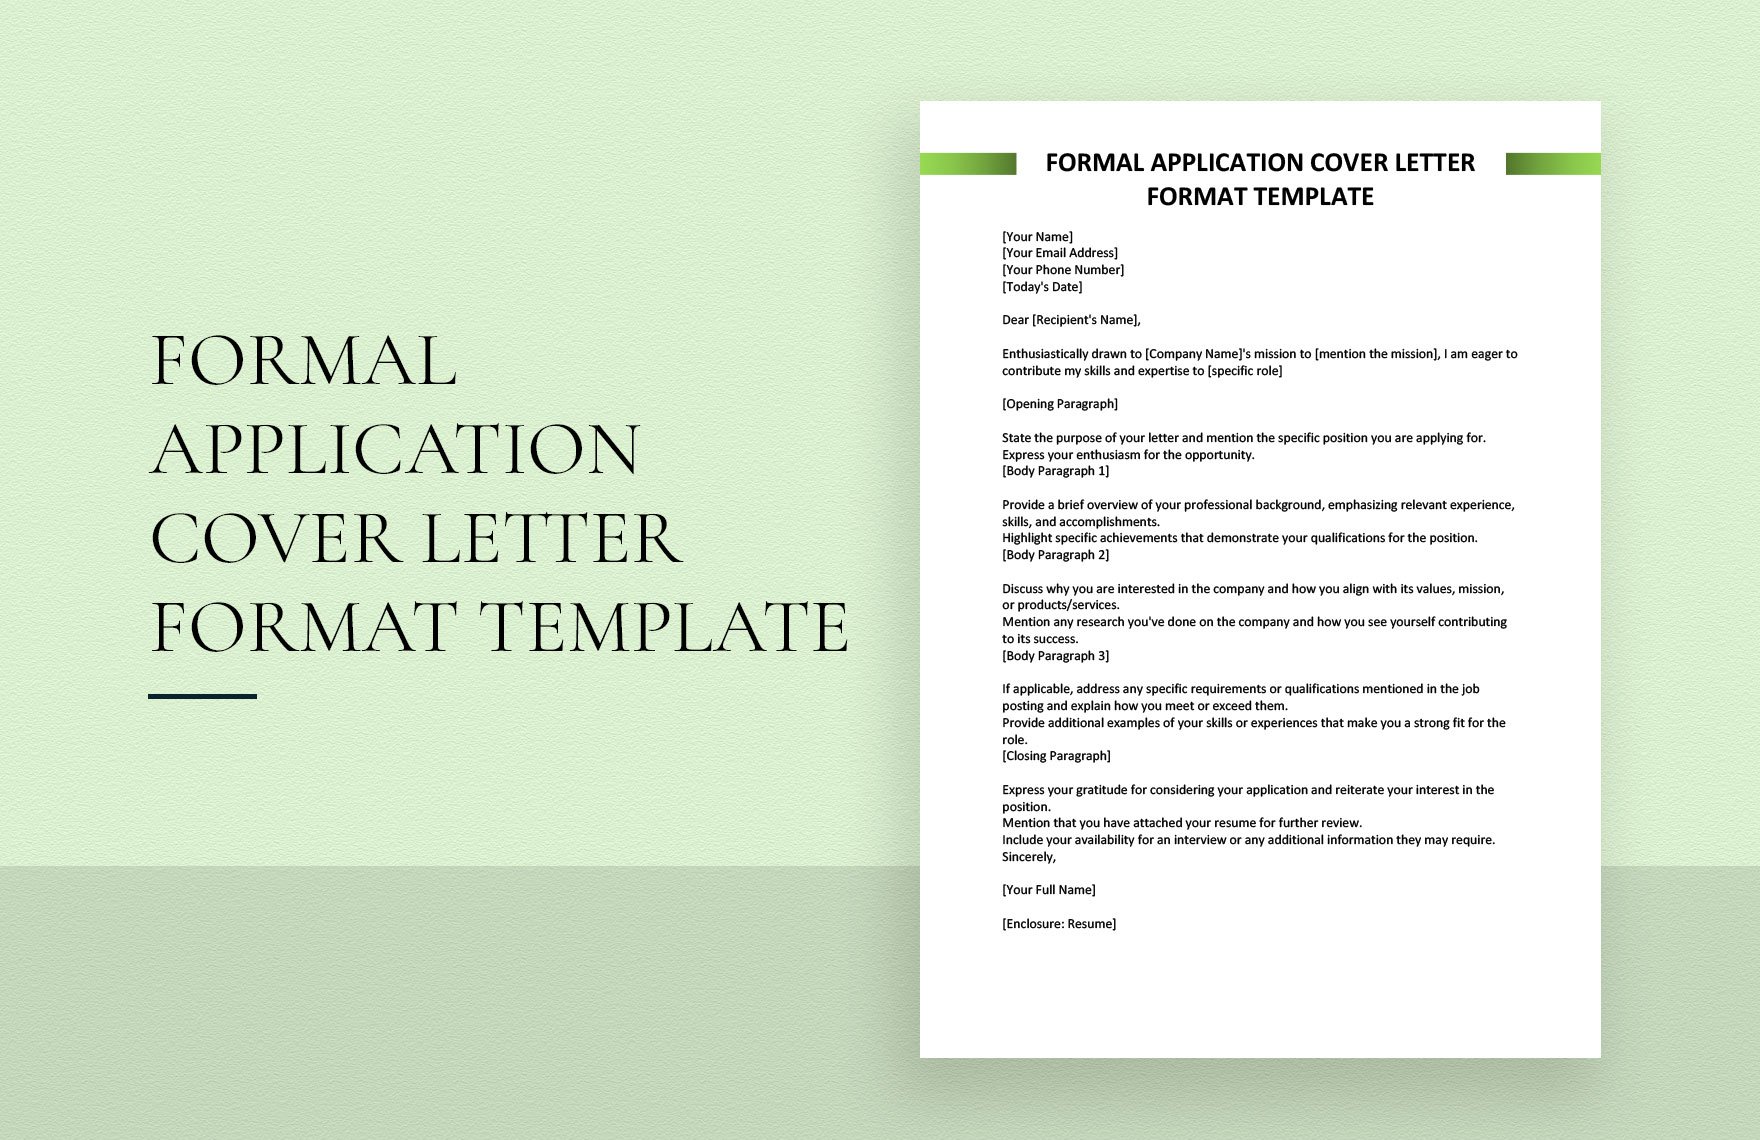 Formal Application Cover Letter Format Template in Word, Google Docs